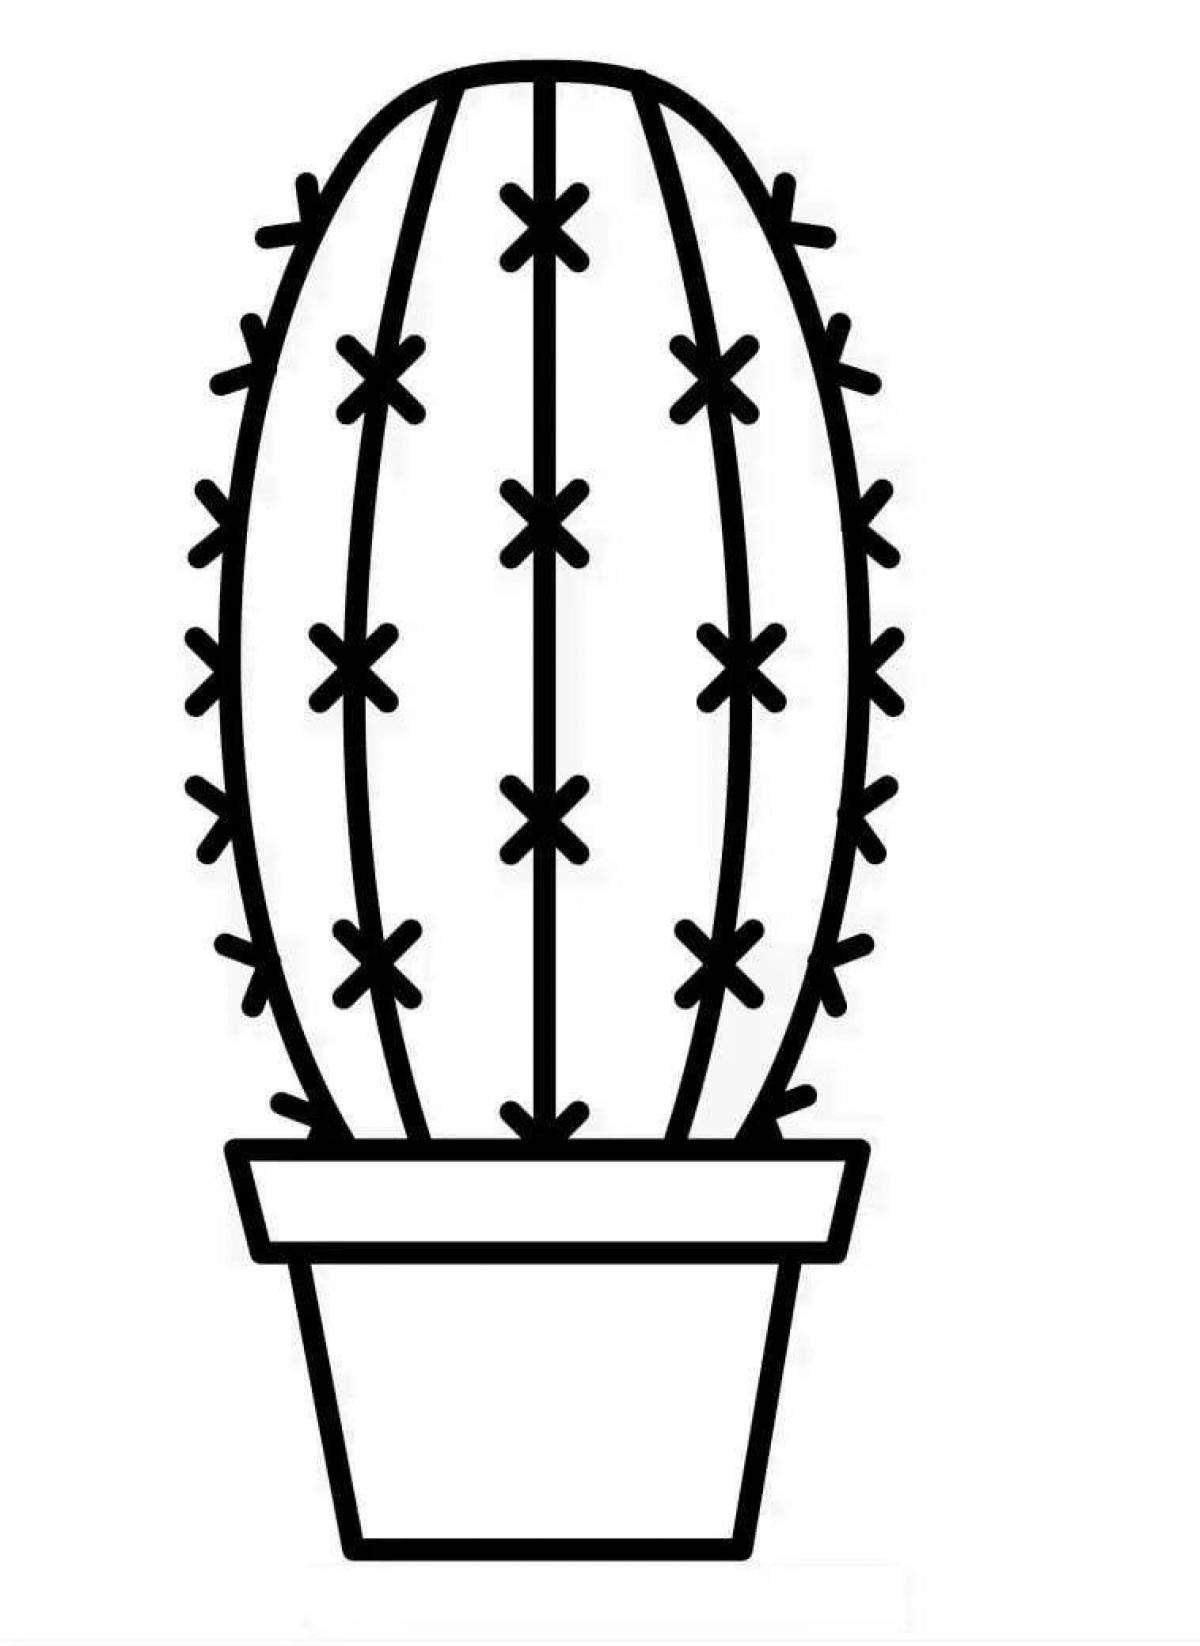 Glowing cactus in a pot